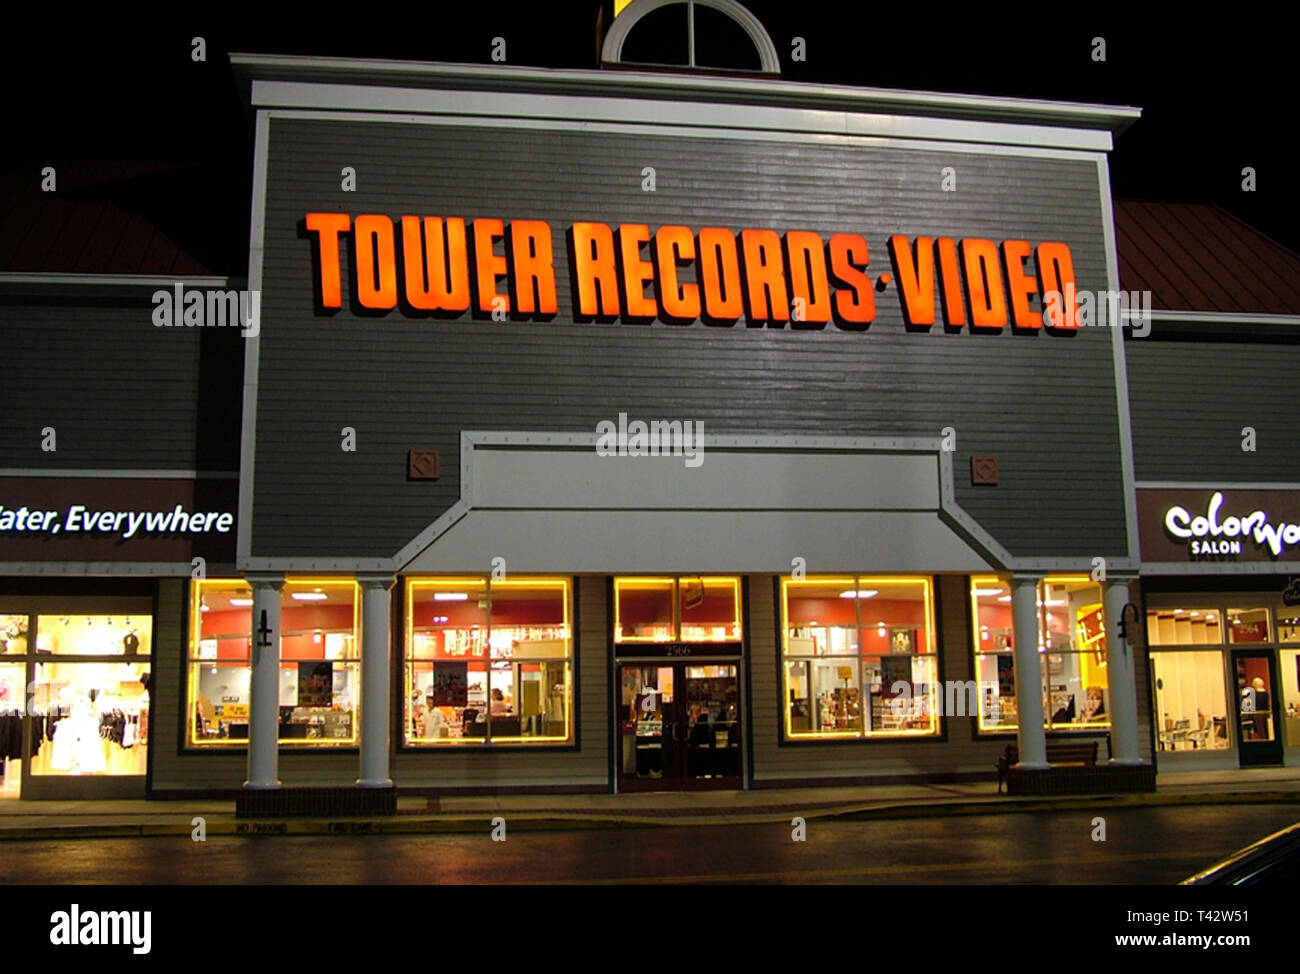 Tower records store, Annapolis MD Banque D'Images